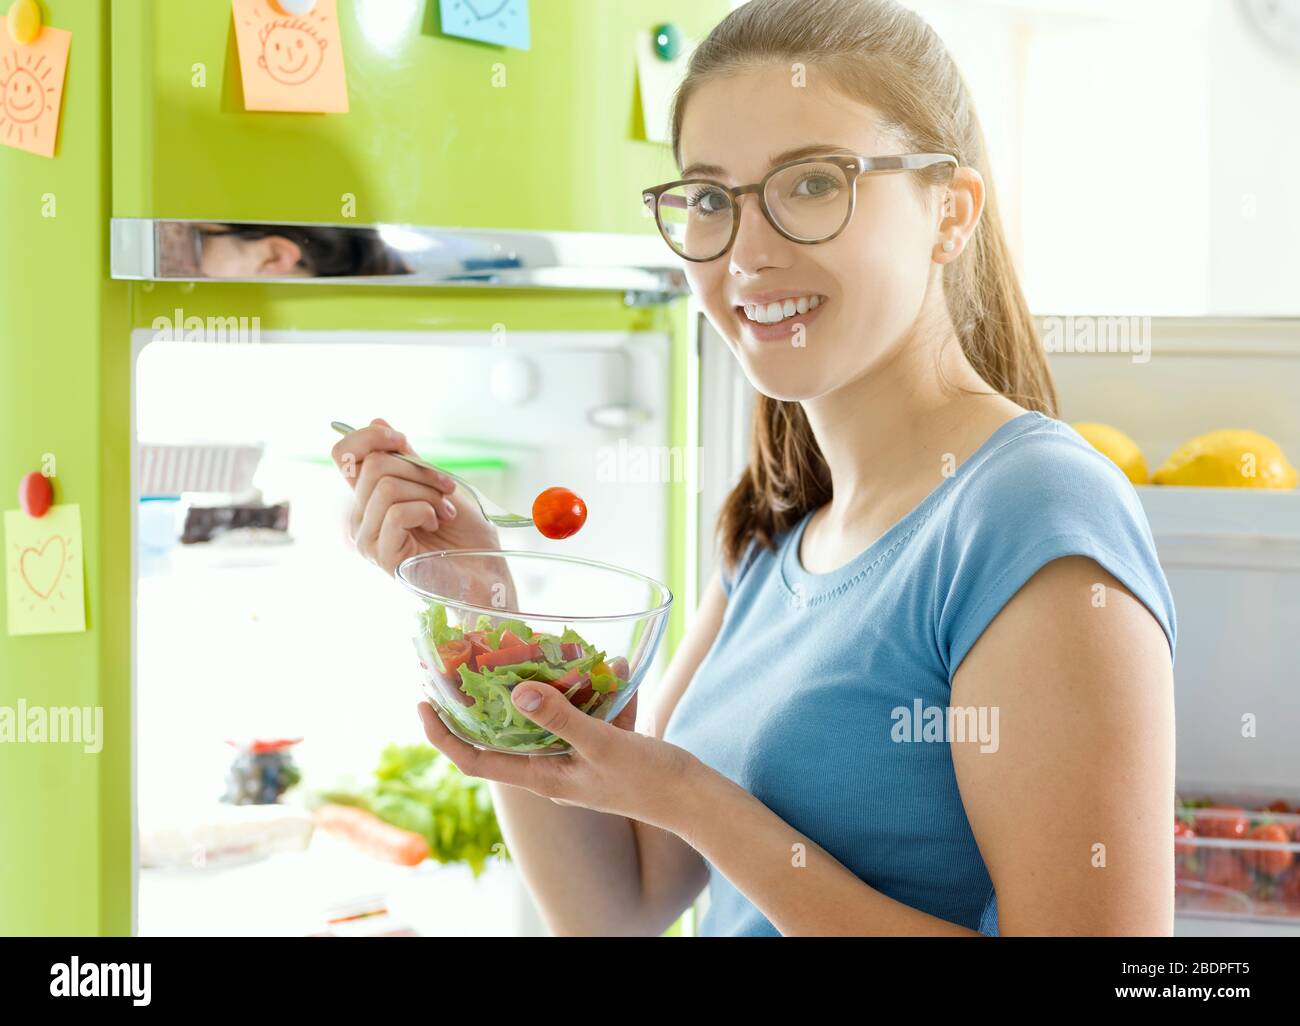 Smiling woman eating some fresh salad next to the fridge, healthy vegan food and dieting concept Stock Photo